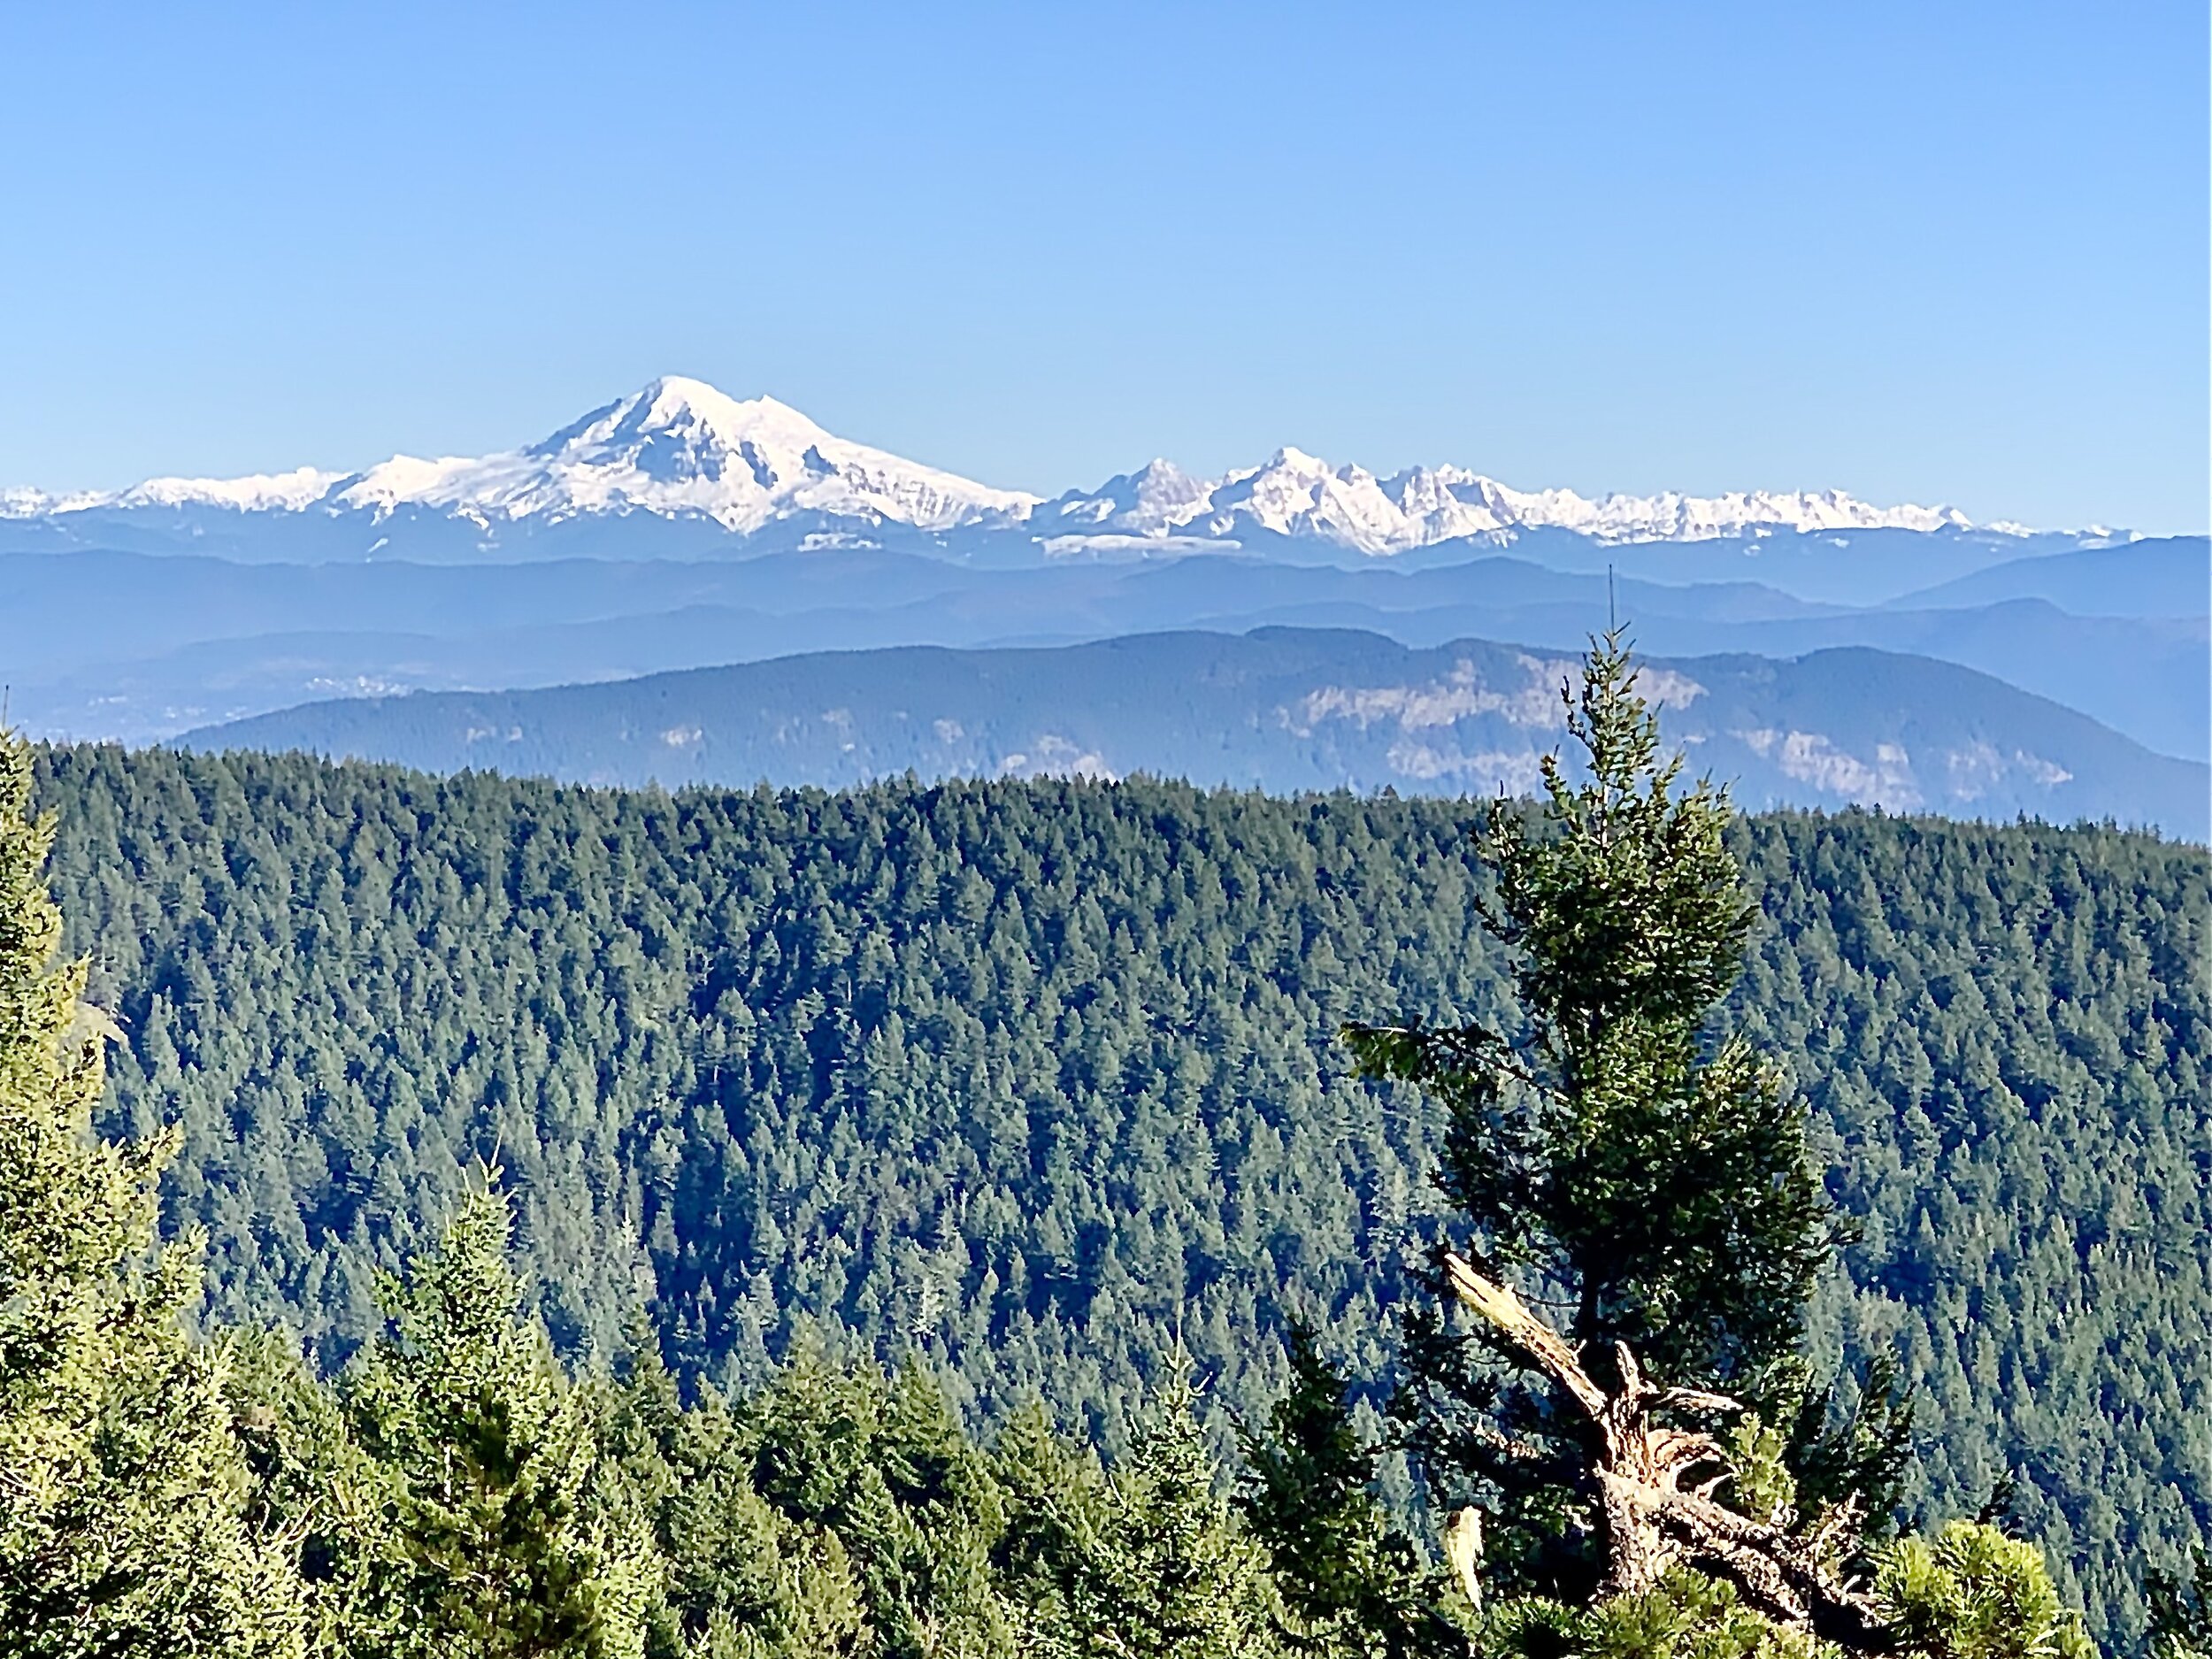 Mount Baker from the top of Orcas Island